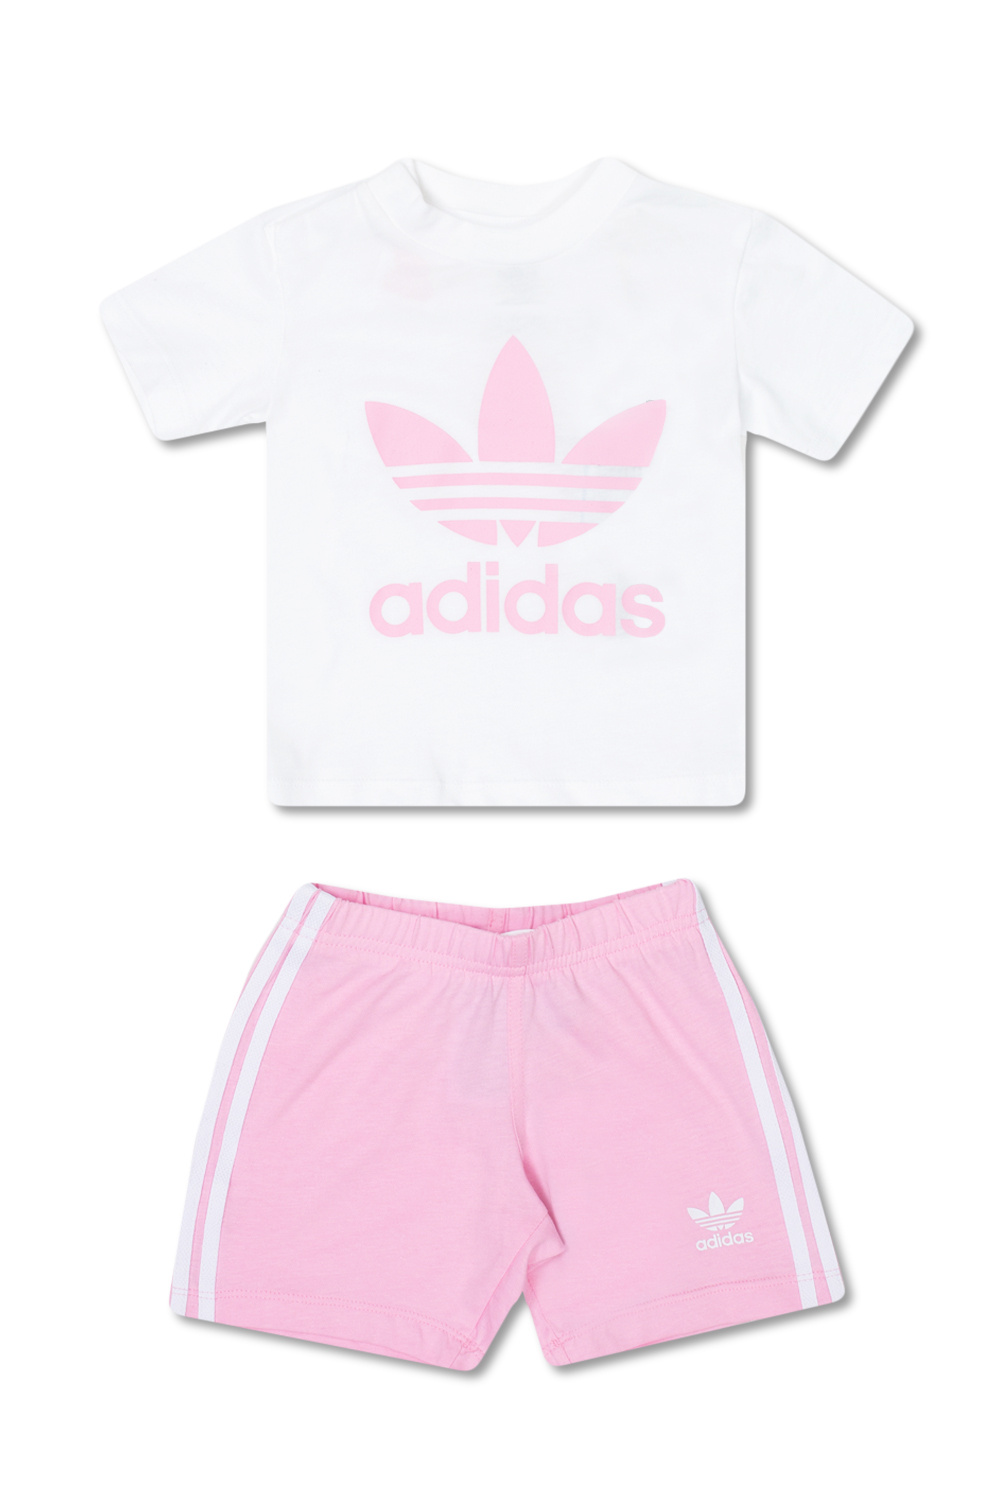 ADIDAS Kids adidas recovery sneakers shoes for women images